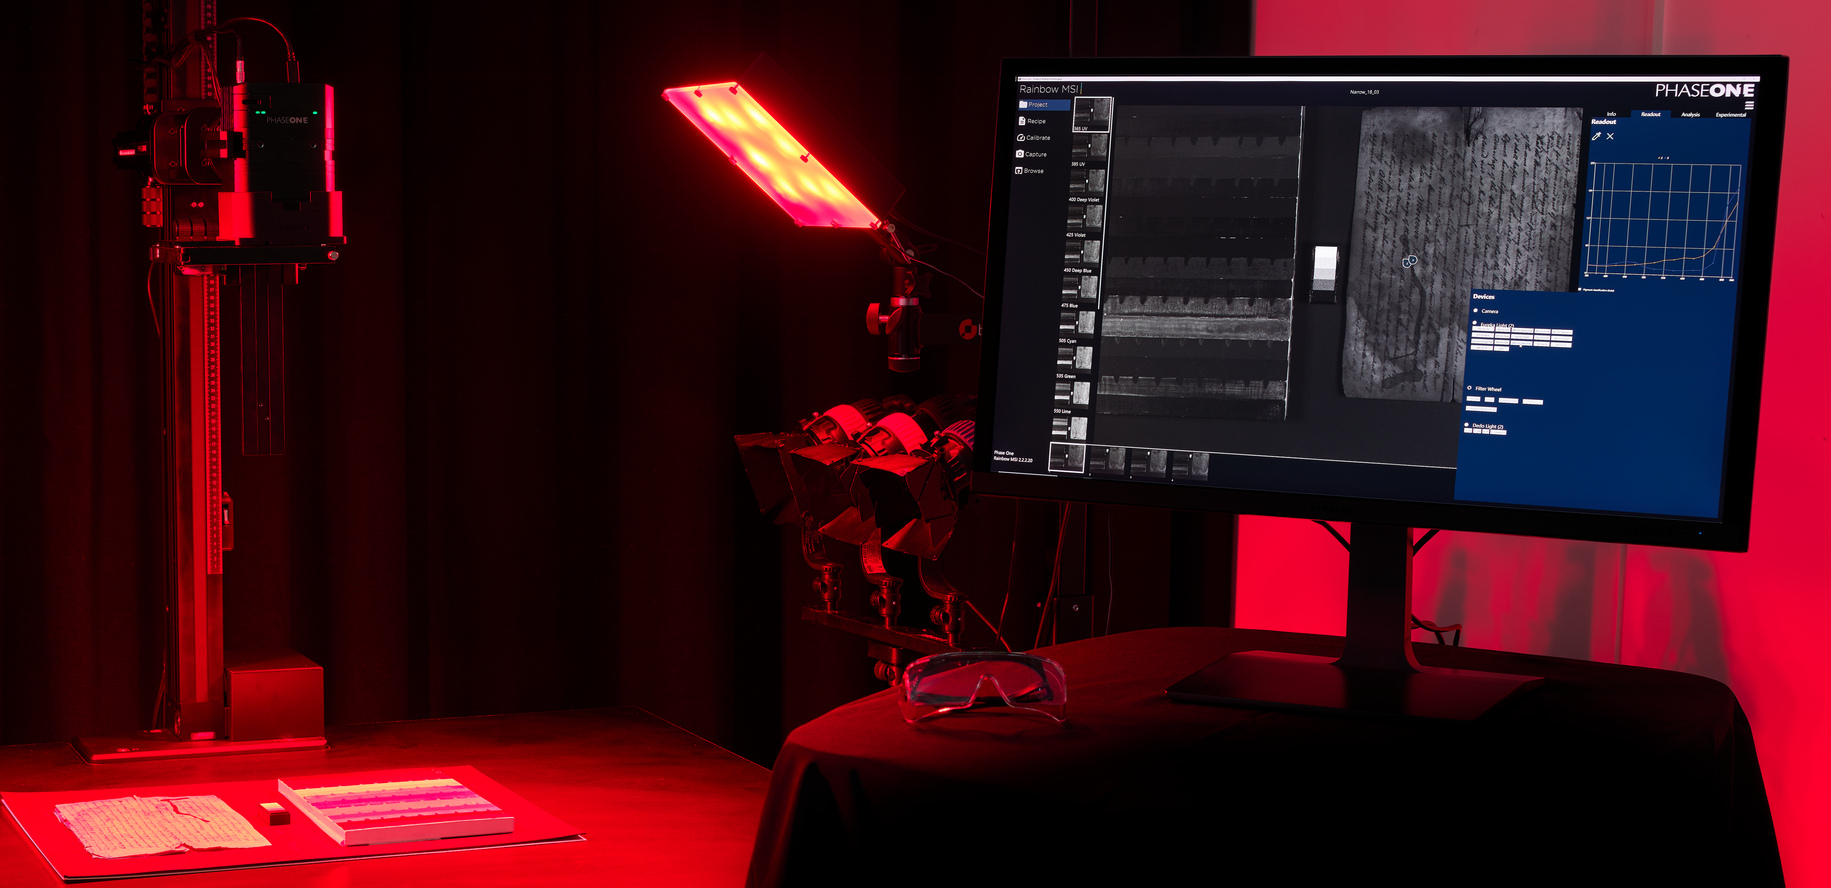 Multispectral imaging in action with Phase One equipment